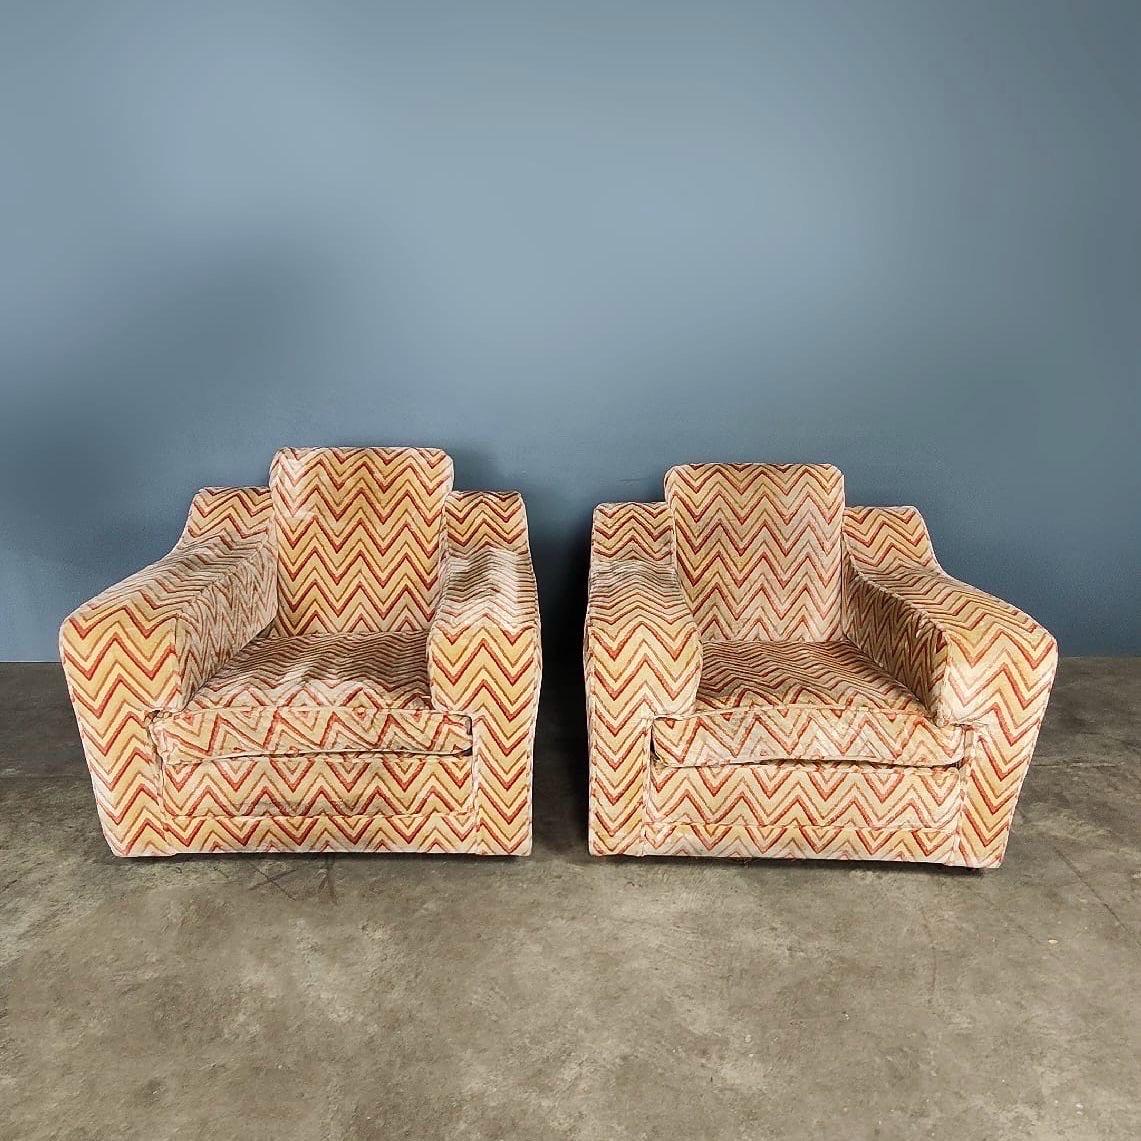 New Stock ✅

Mid Century Red and Cream Matching Armchairs Club Chairs Vintage Retro MCM

Matching lounge chairs In a beautiful red and cream zig zag geometric pattern, which we believe is the original upholstery, very much in the style of Howard